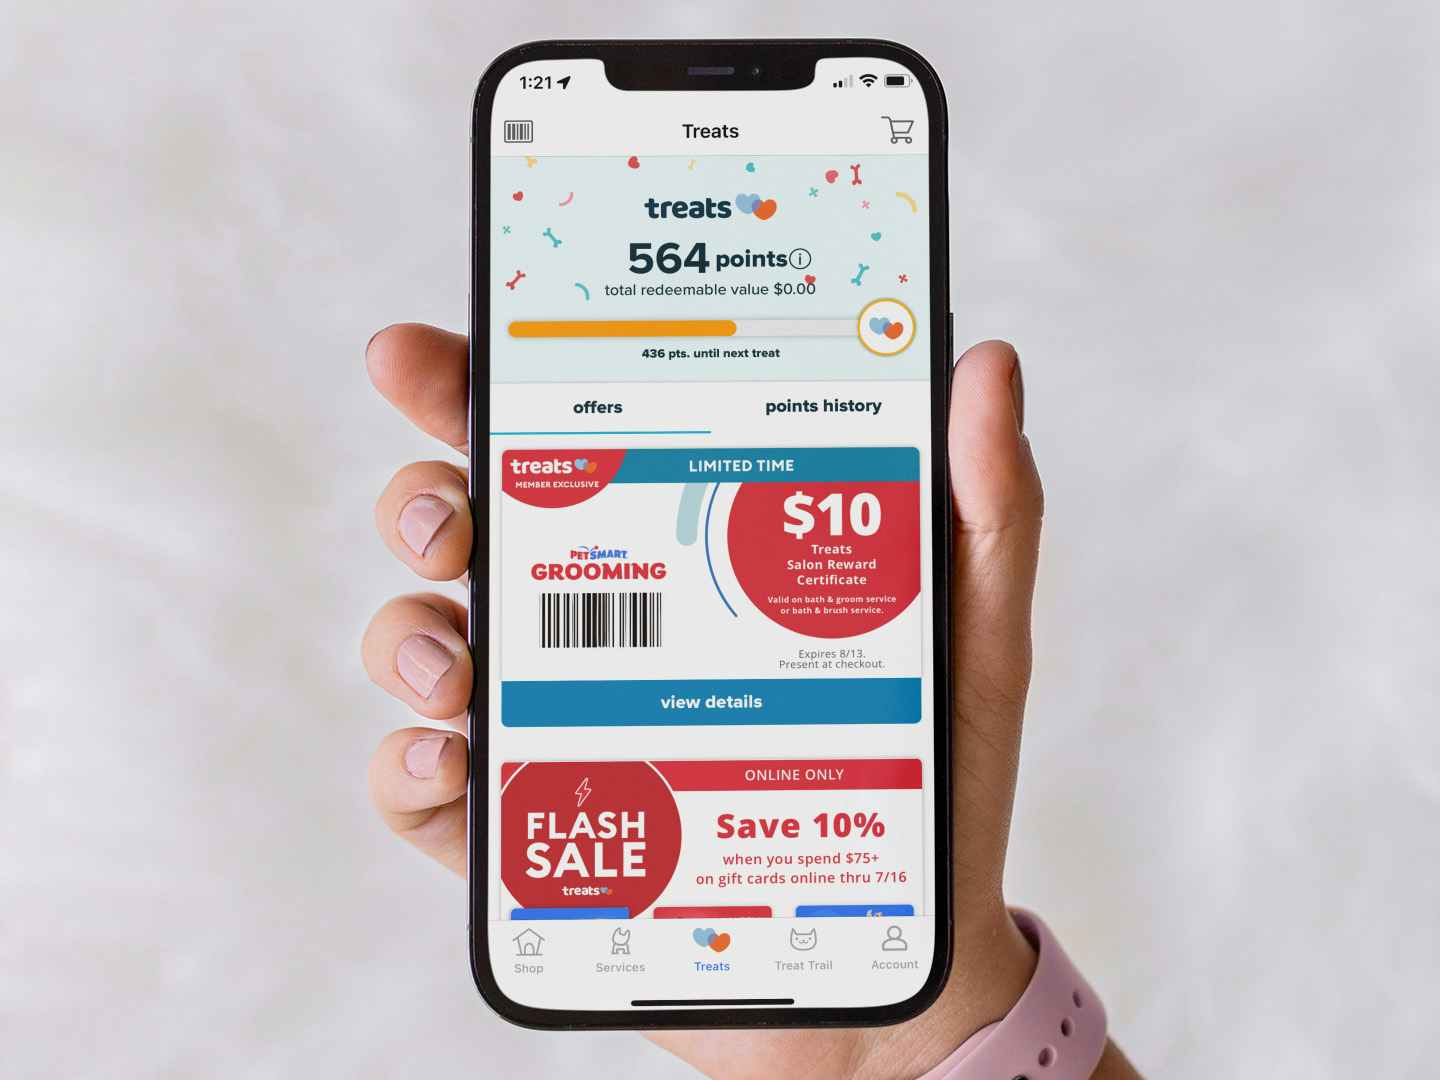 Someone holding up a Petsmart grooming coupon in the offers section of the app